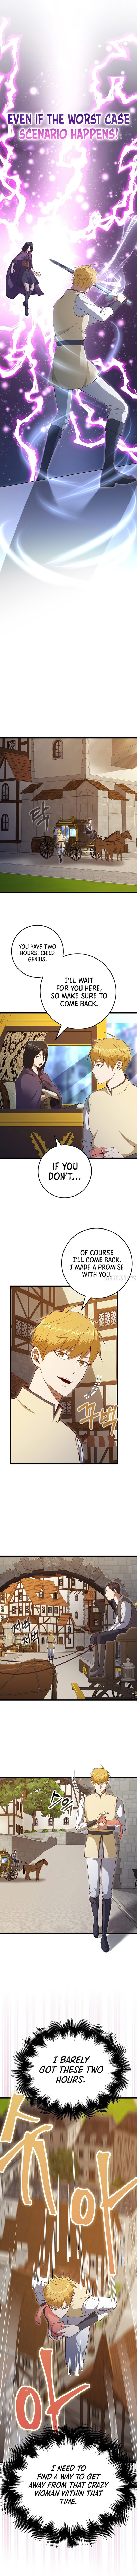 the-lords-coins-arent-decreasing-chap-86-4